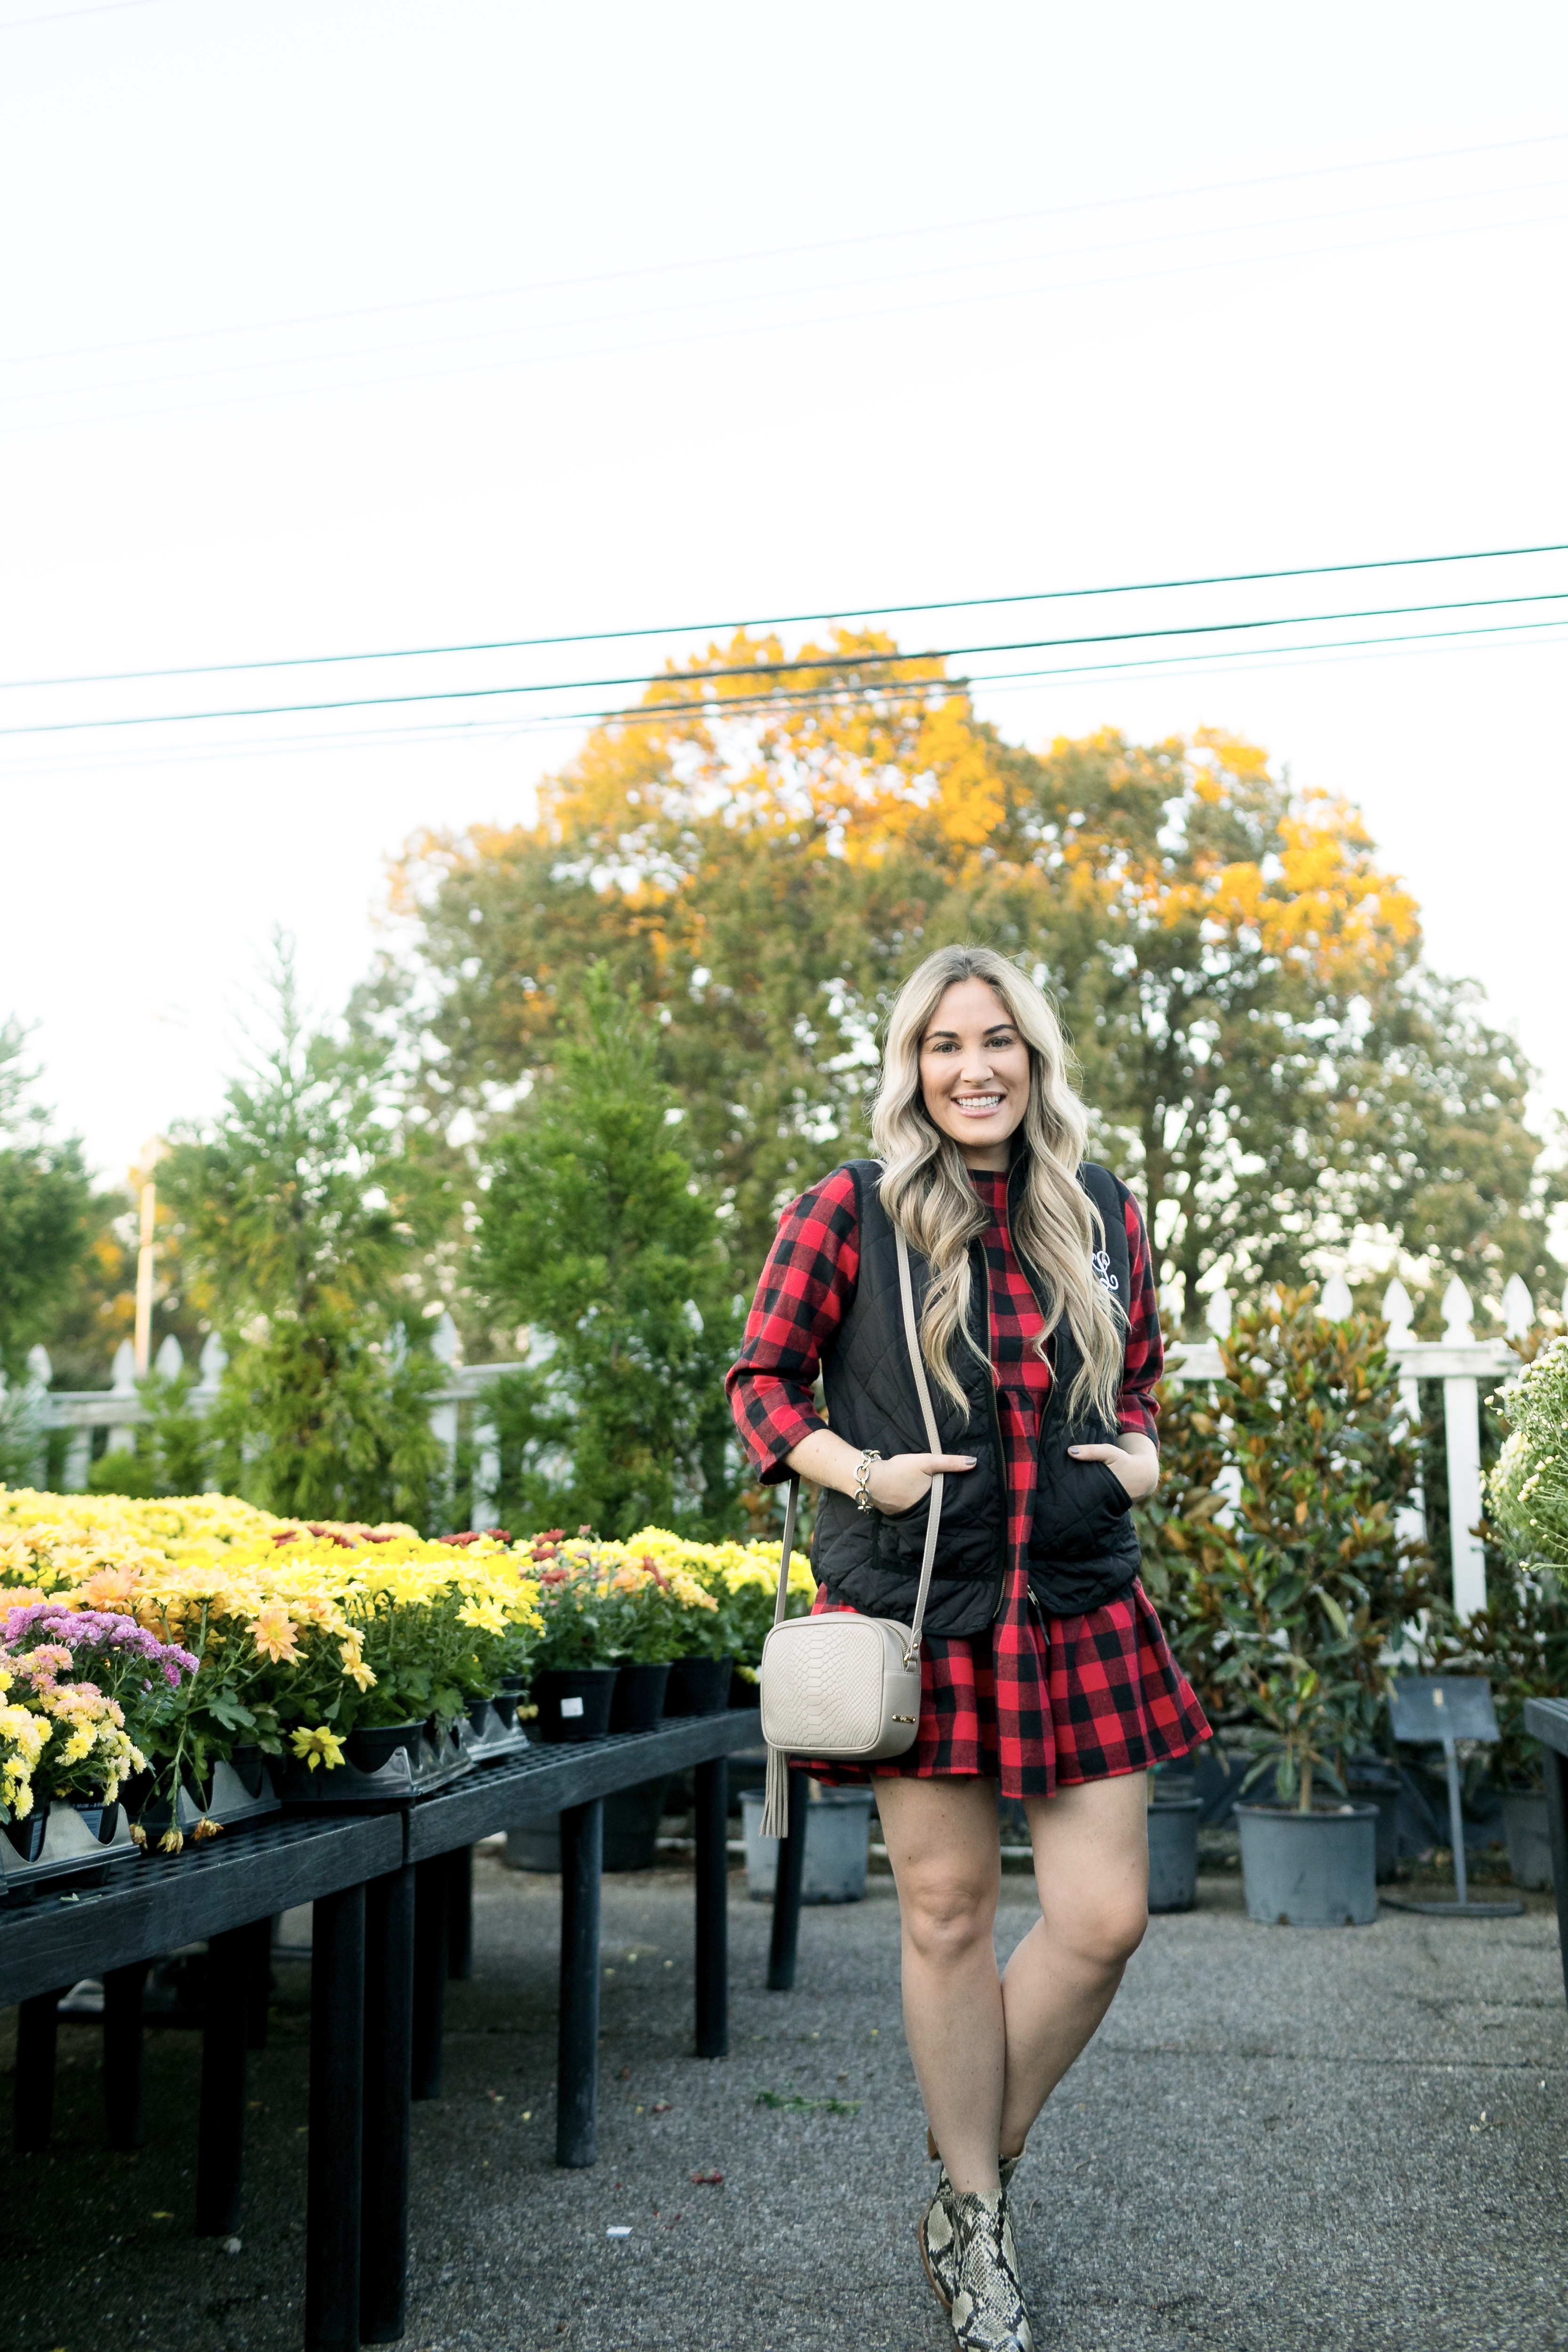 How to layer clothes in the fall, tips featured by top US fashion blog, Walking in Memphis in High Heels: image of a woman wearing a SheIn plaid smock dress, MarleyLilly monogrammed puffer vest, and Vince Camuto snakeskin booties.